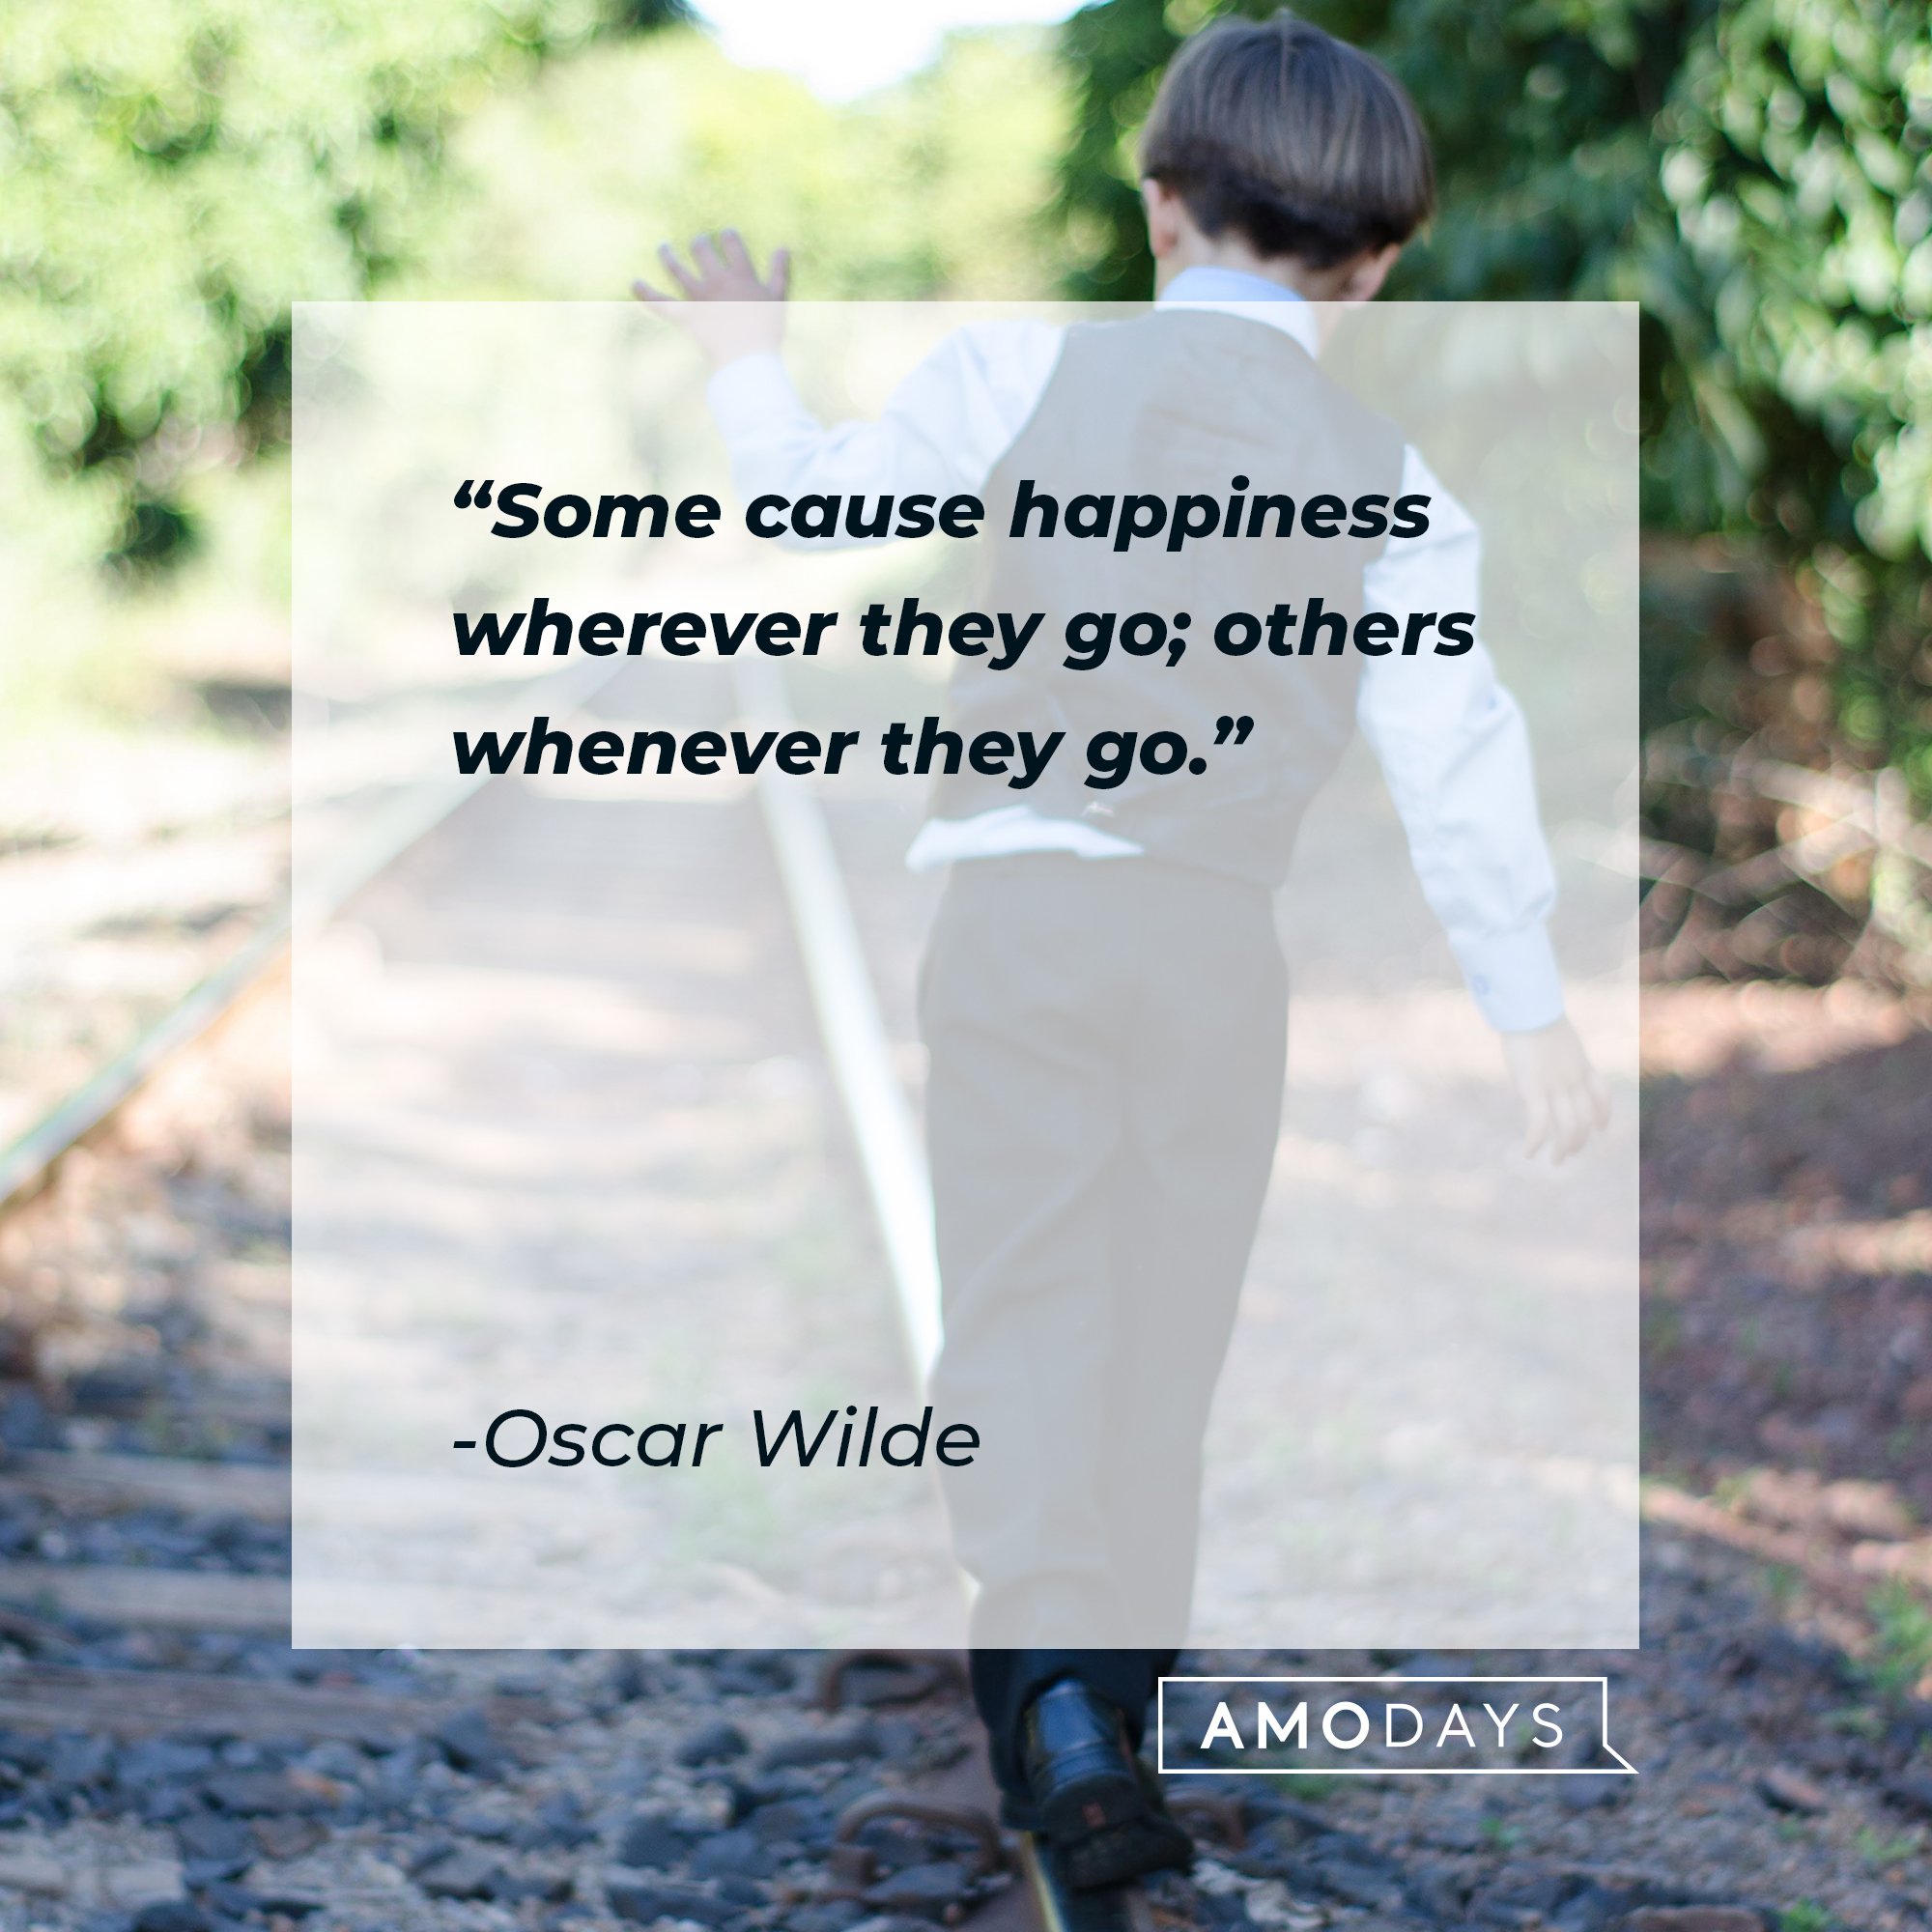 Oscar Wilde’s quote: "Some cause happiness wherever they go; others whenever they go." | Image: AmoDays